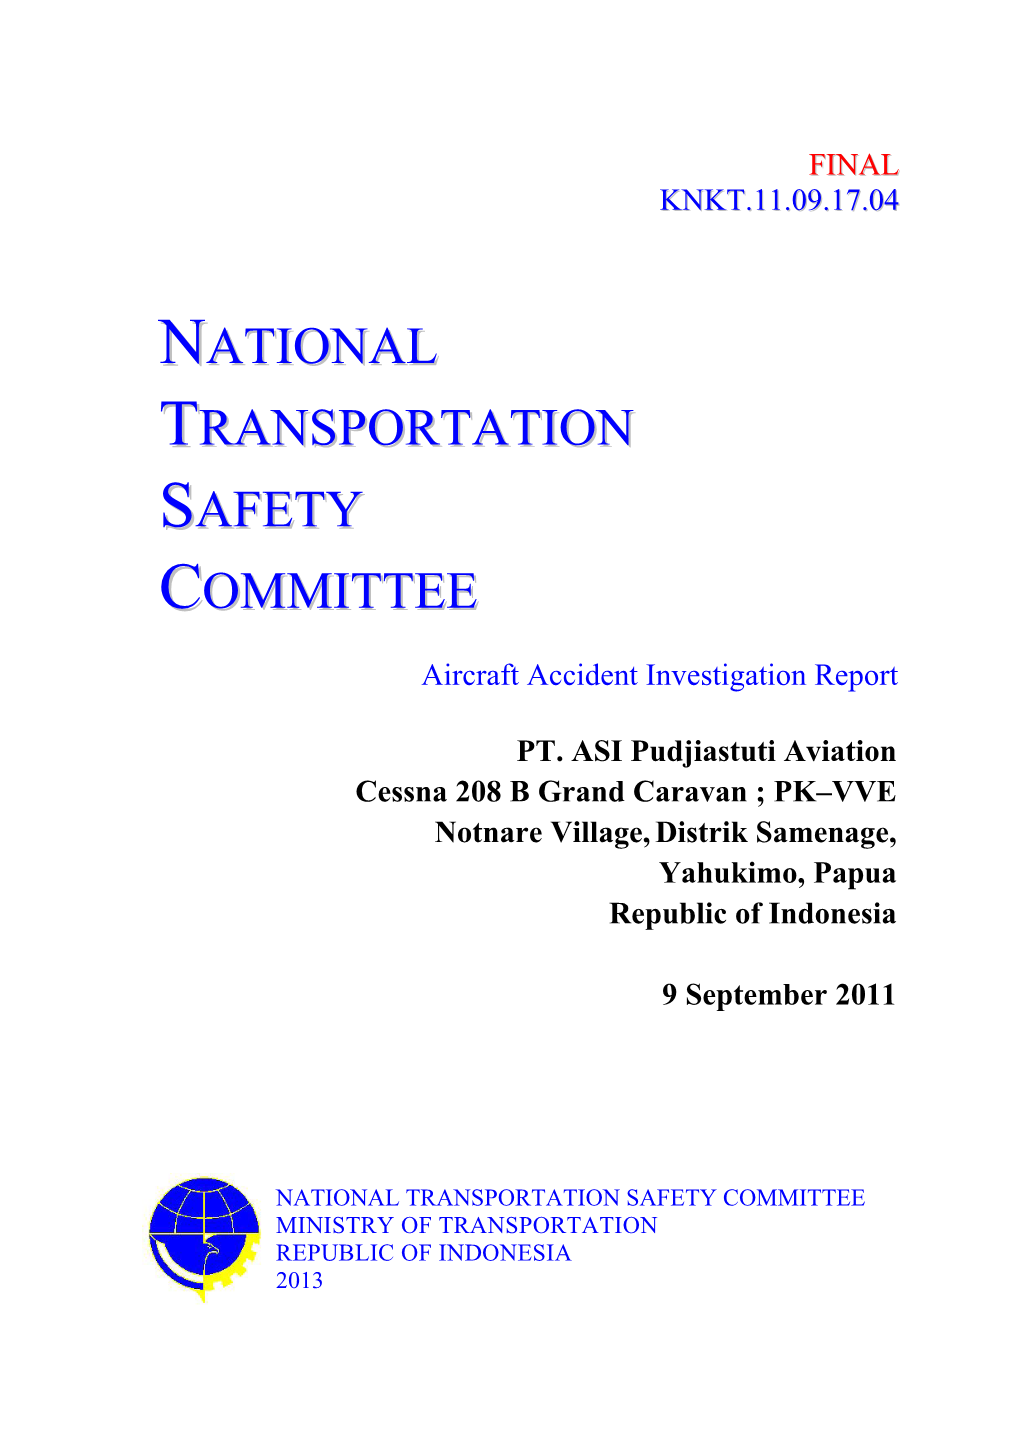 National Transportation Safety Committee Ministry of Transportation Republic of Indonesia 2013